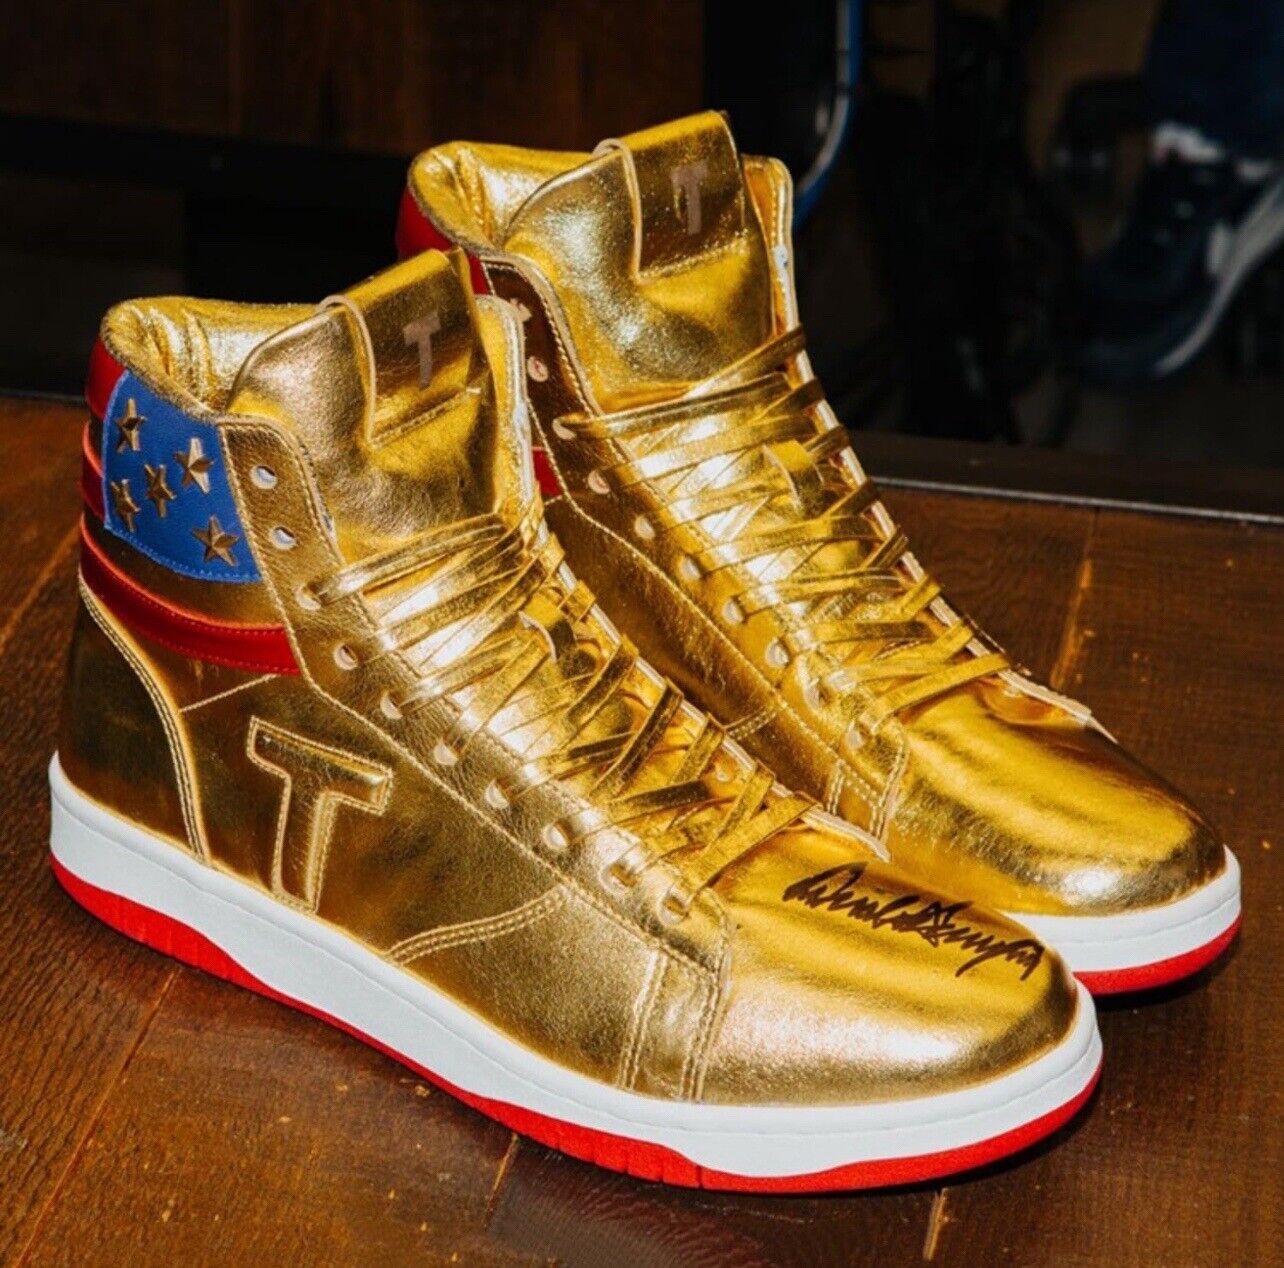 Trump Never Surrender MAGA Gold Pair Shoes (US Size 10) NEW NEVER WORN [NO BOX]